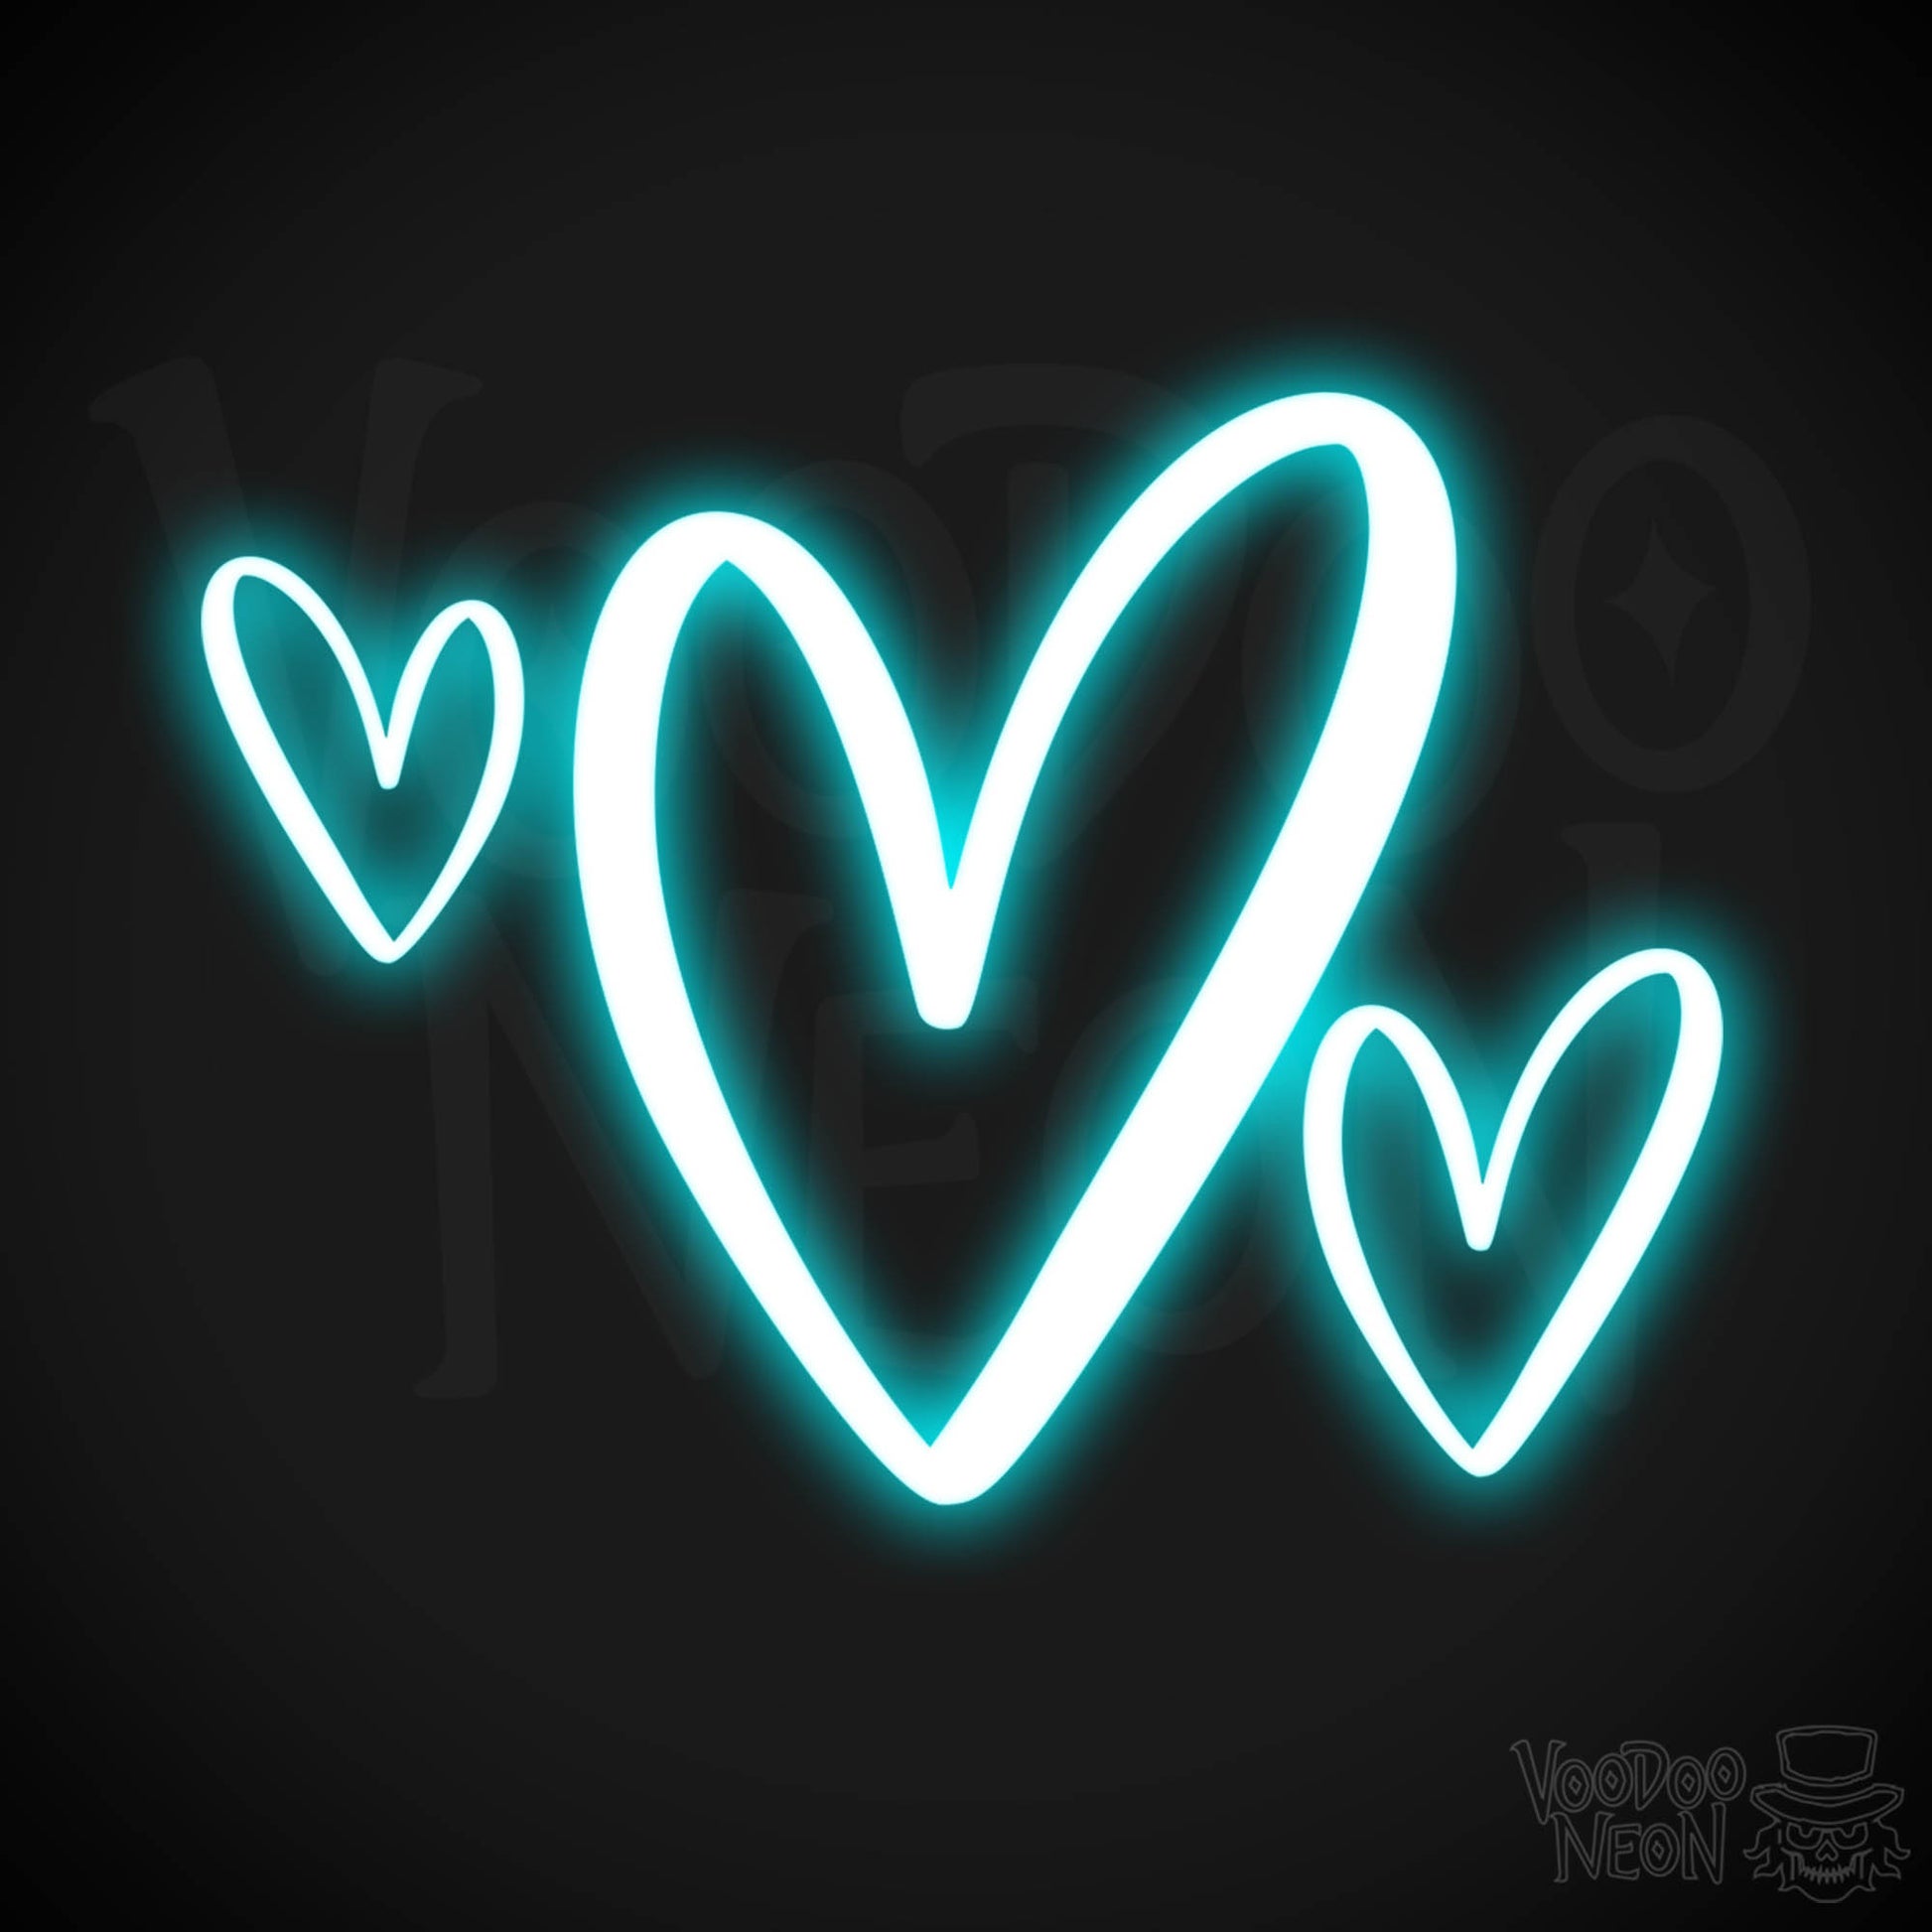 Neon Love Heart - Love Heart Neon Sign - LED Wall Art - Color Ice Blue